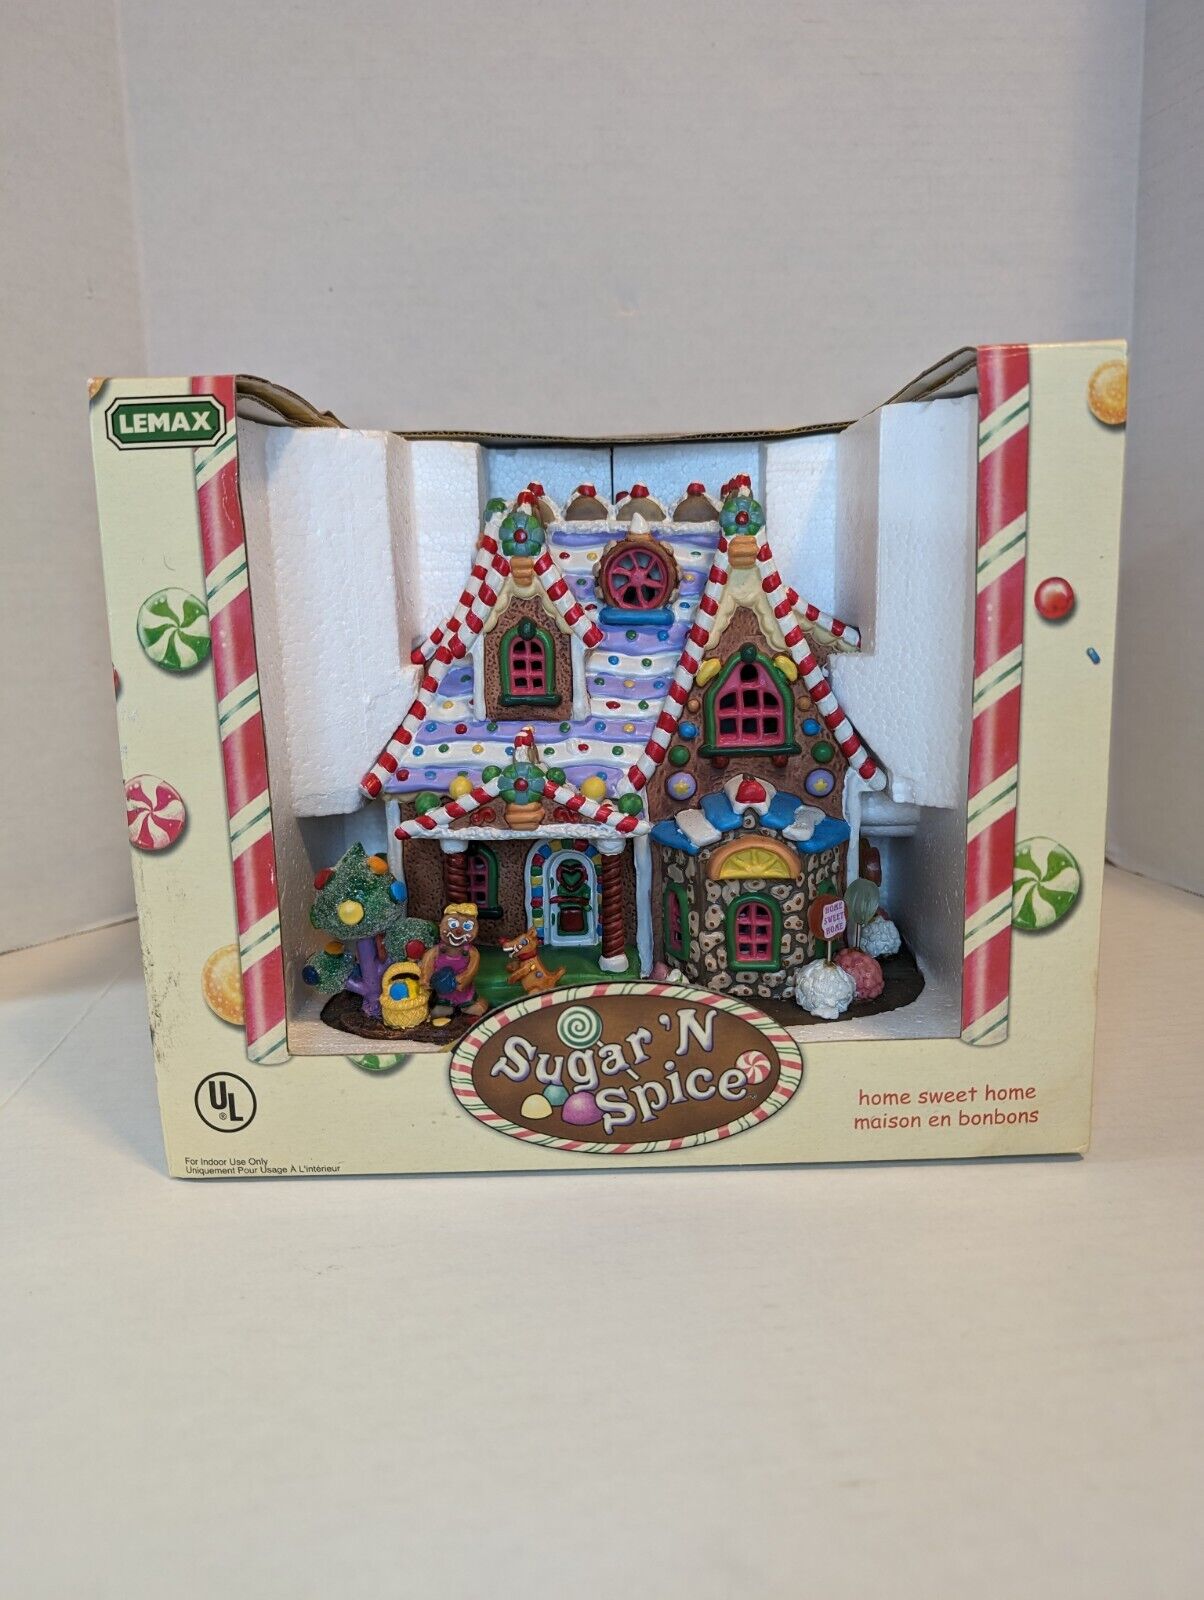 Lemax Sugar N Spice Christmas - Home Sweet Home - NEW IN BOX